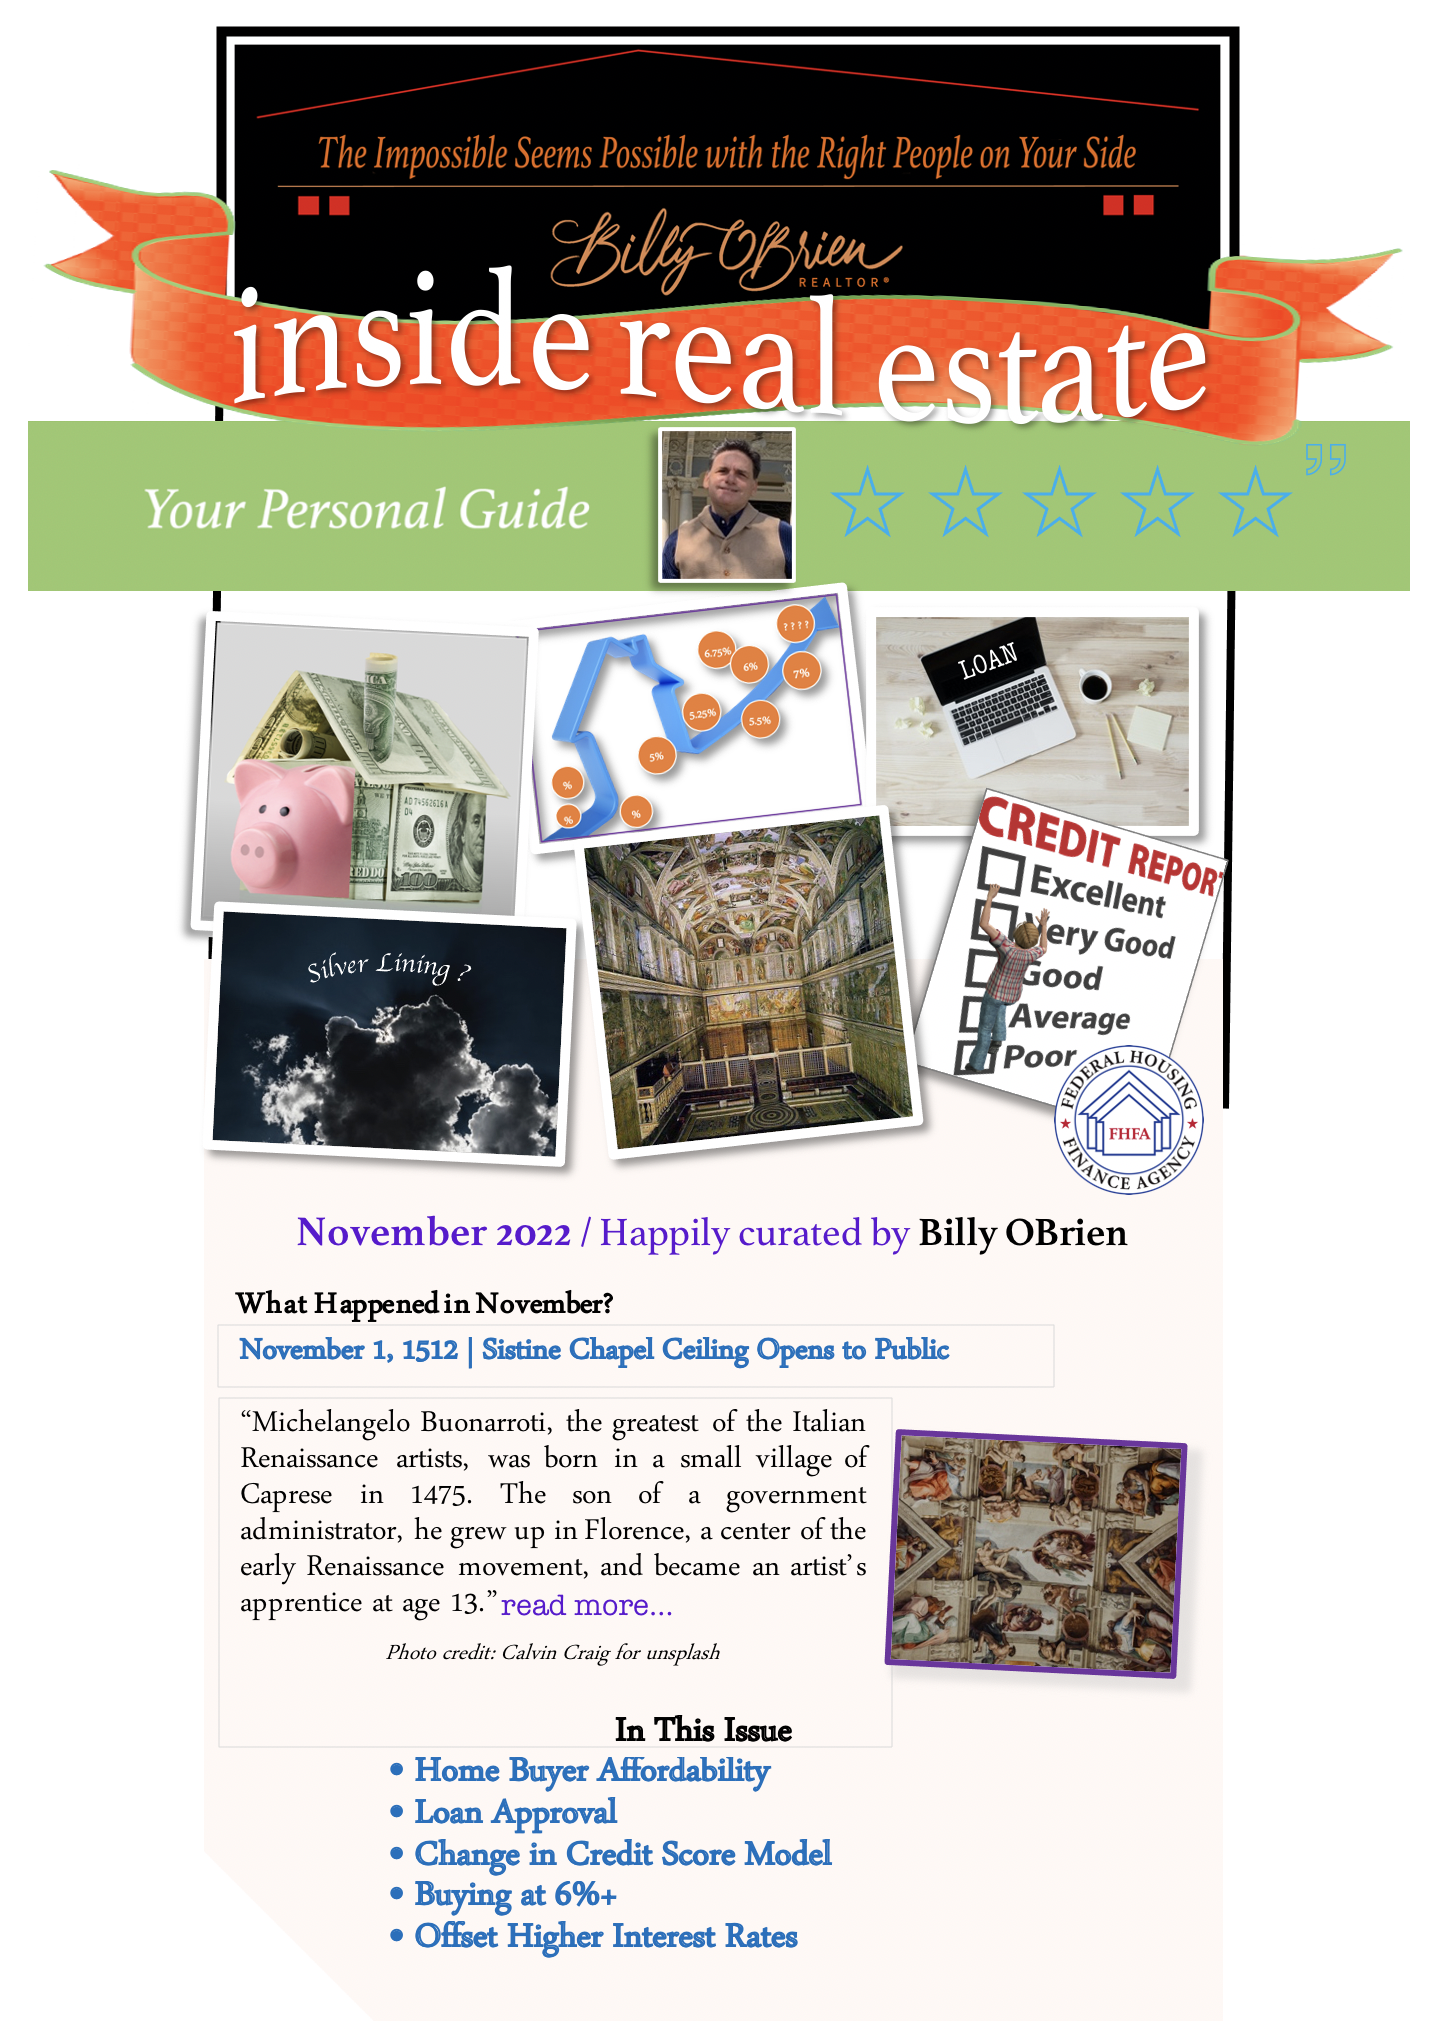 Page 1 of inside real estate issue